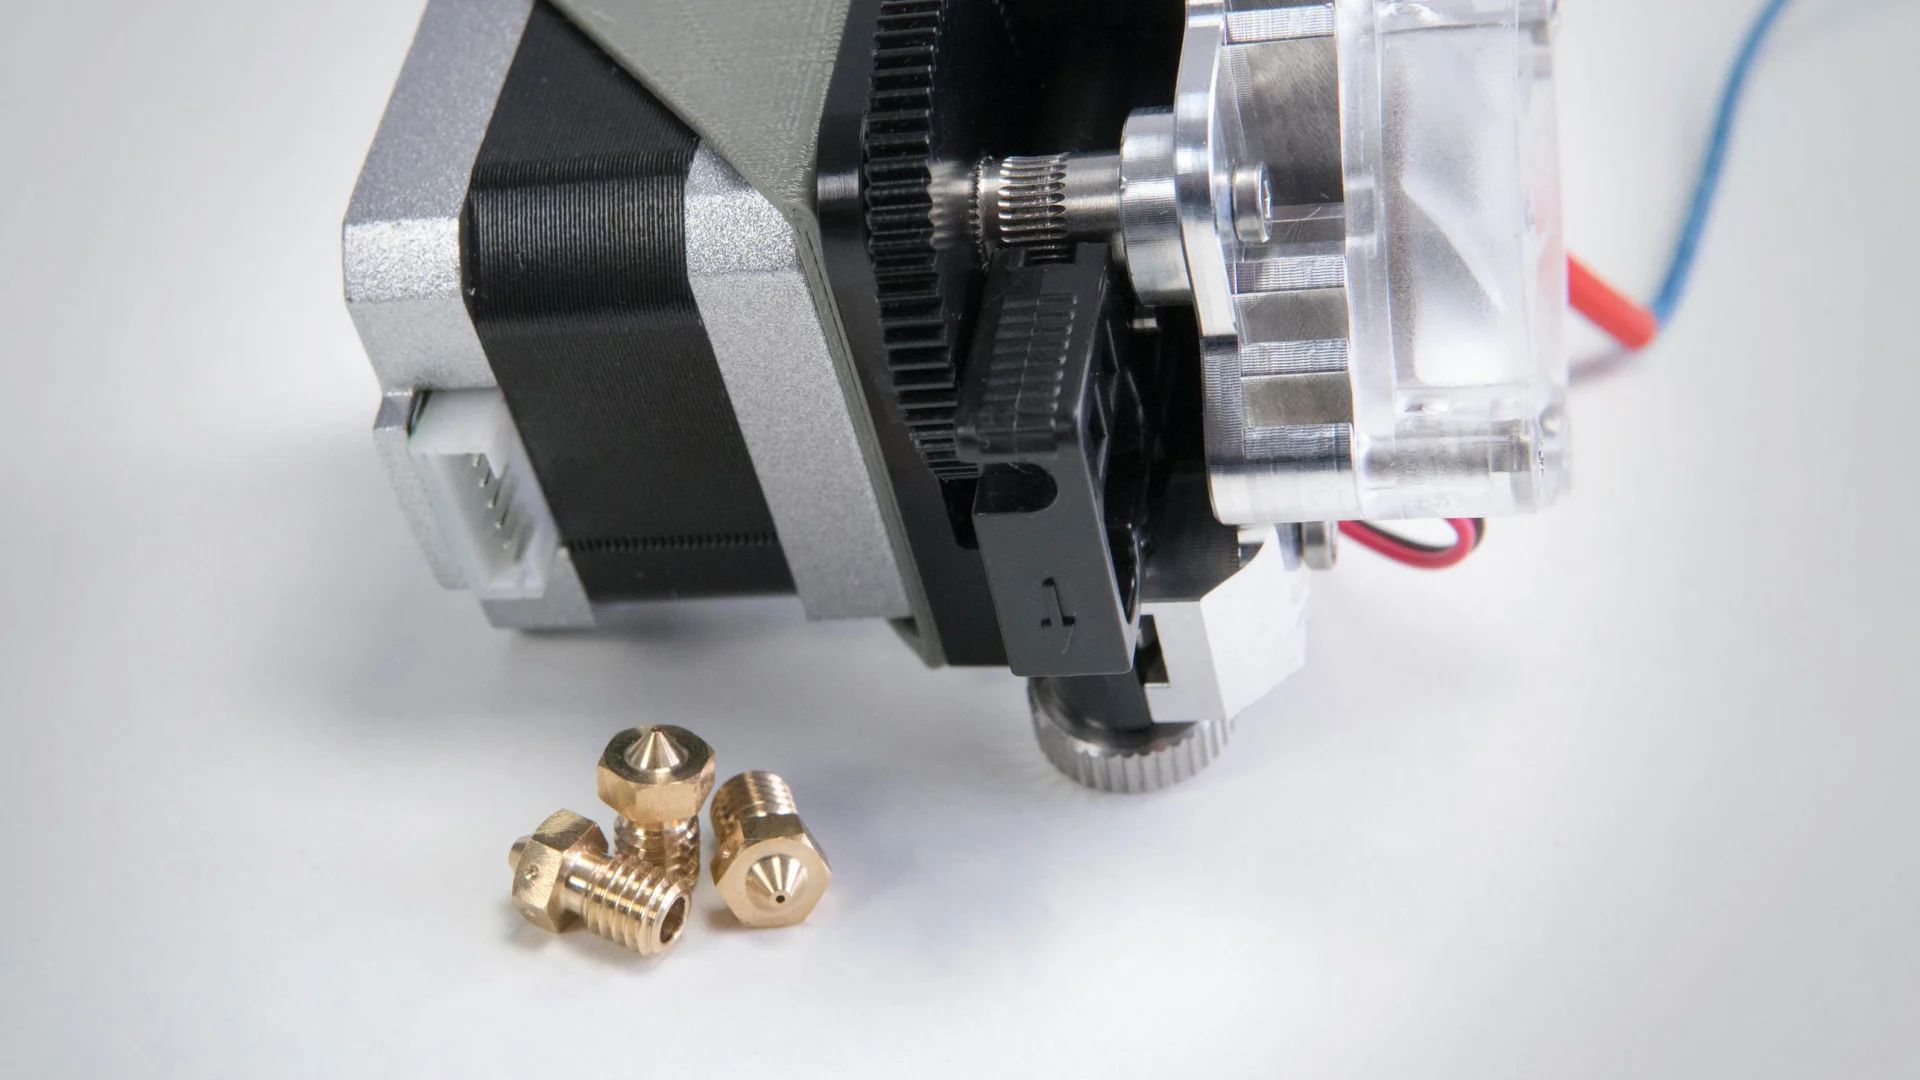 What Is The Extruder In A 3D Printer